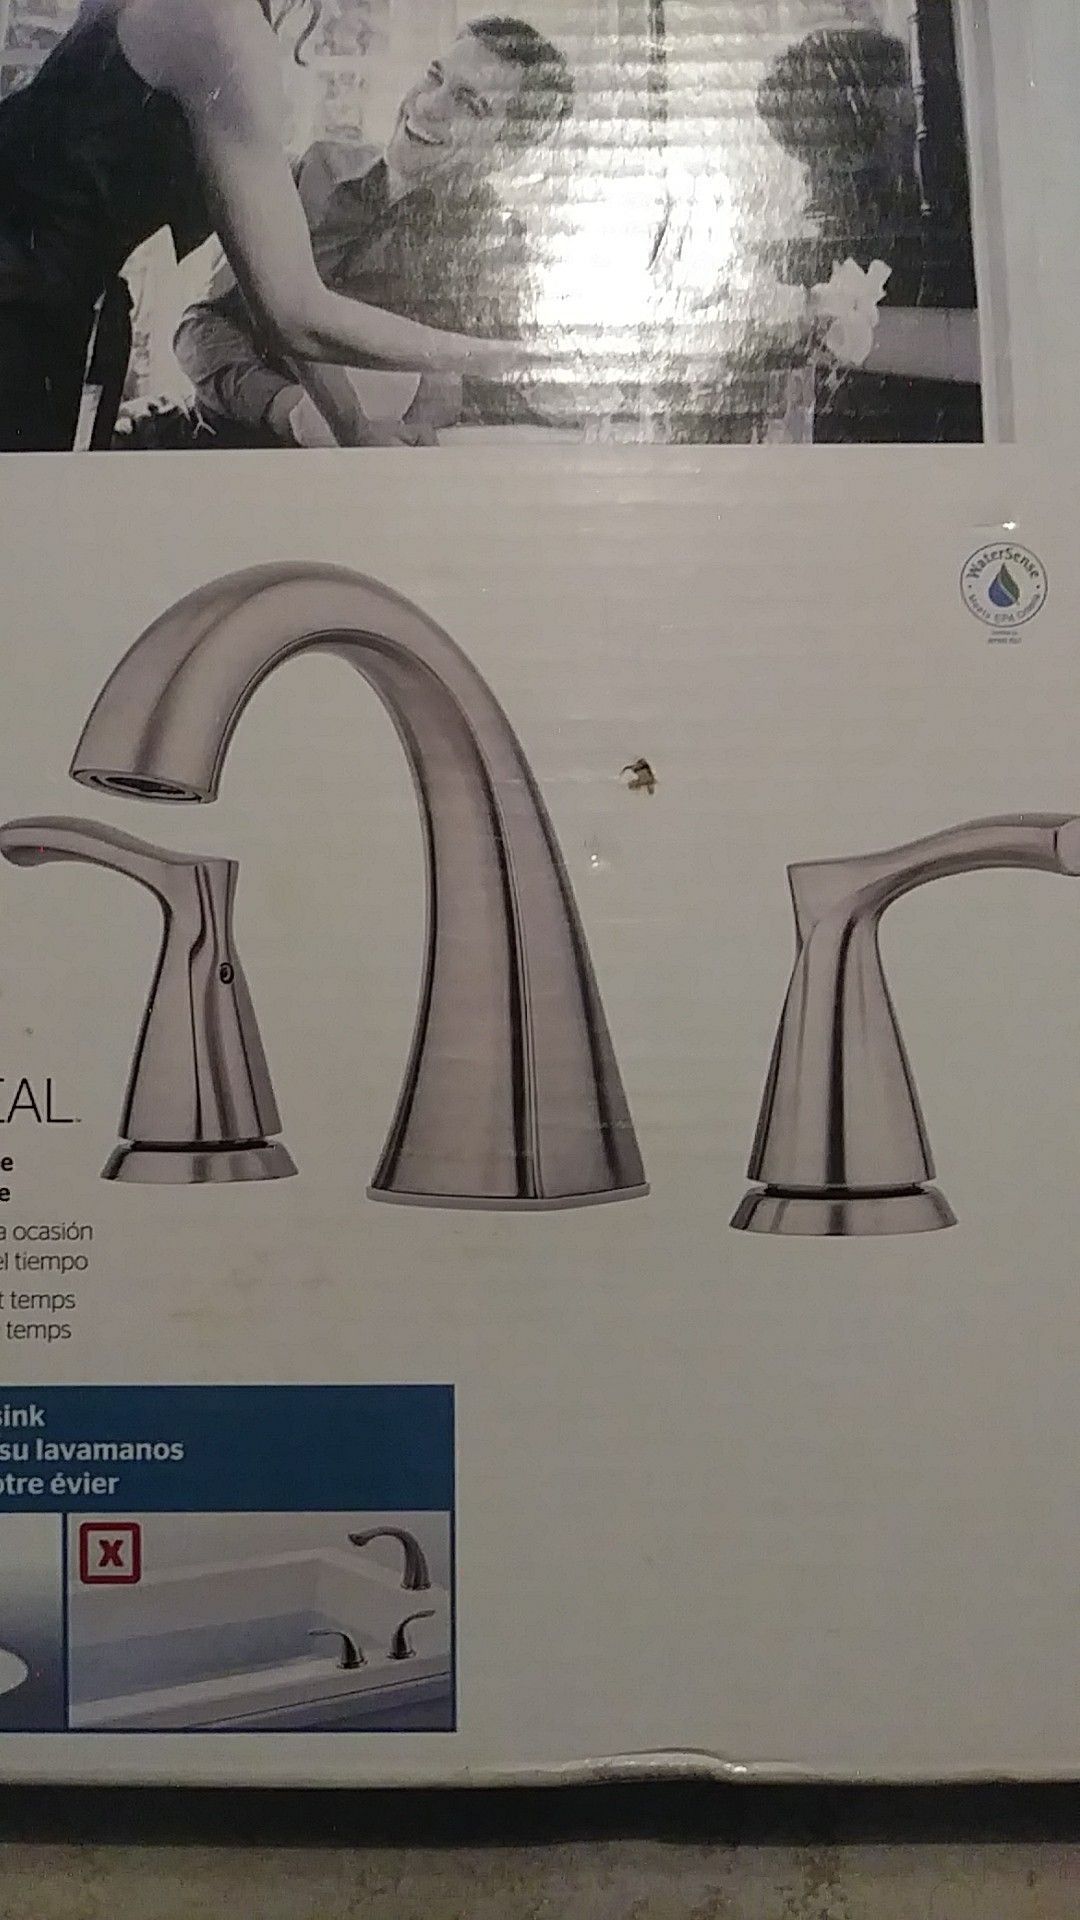 New pfister faucet. Or best offer